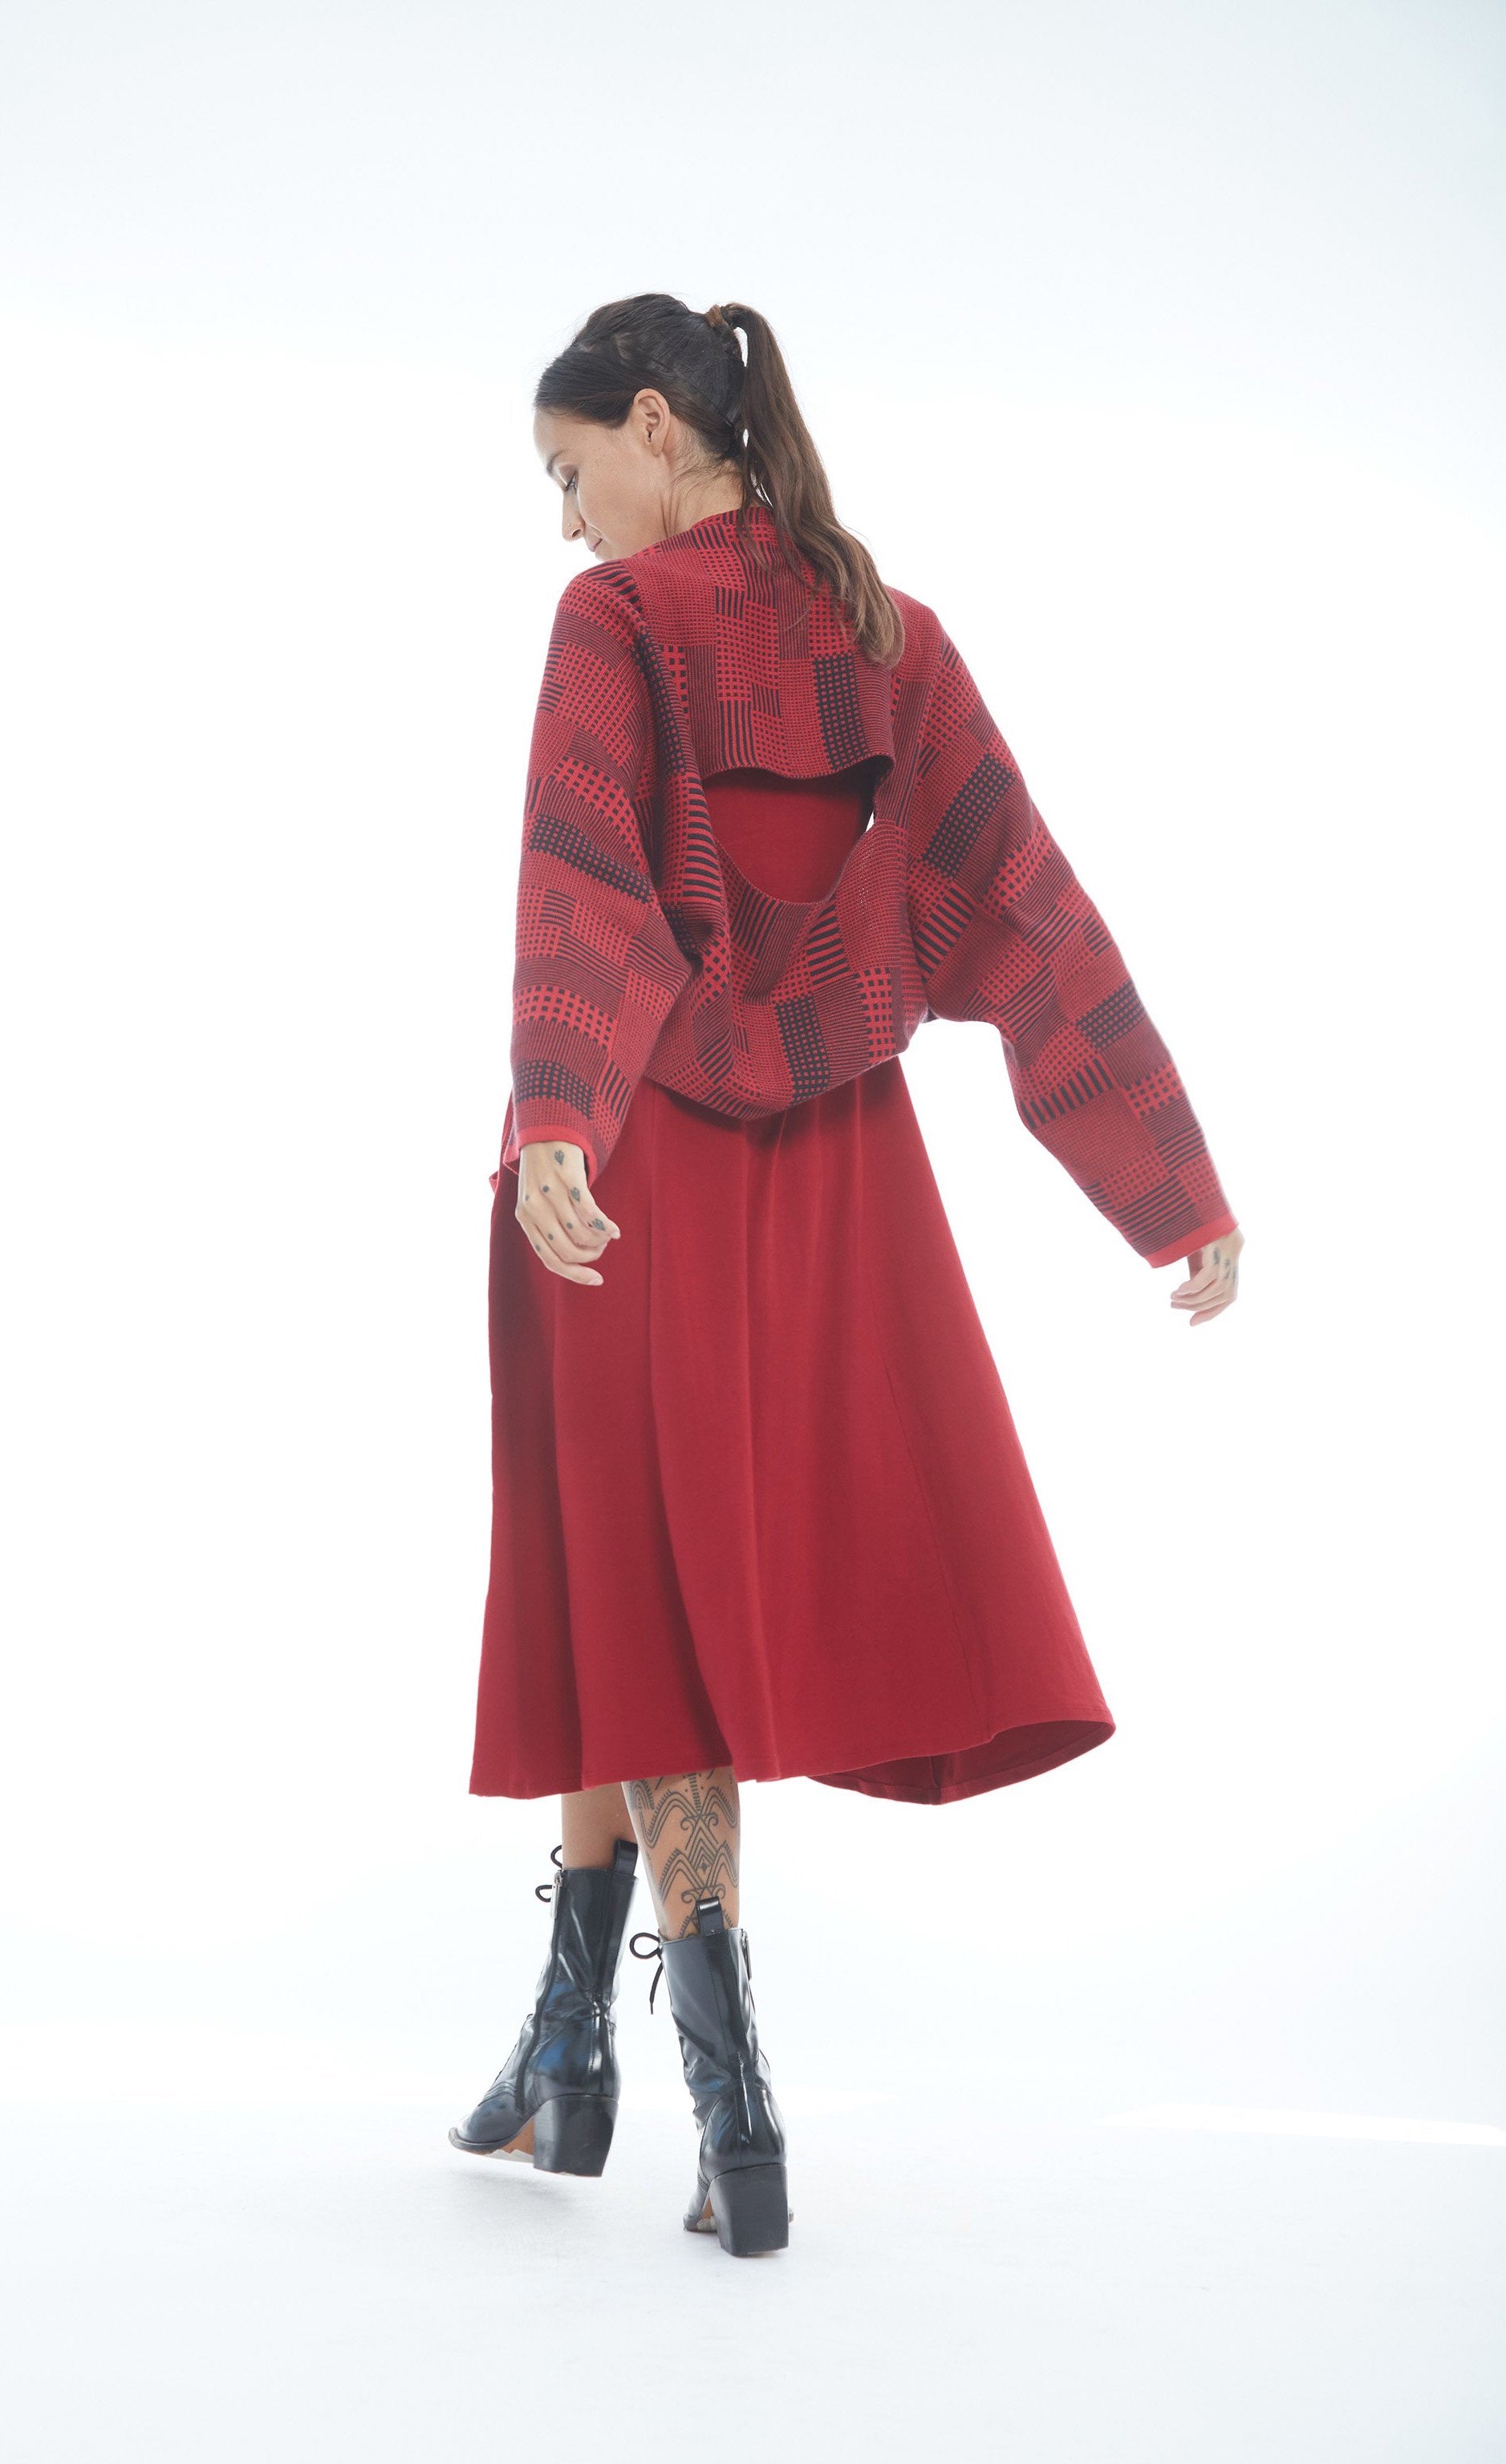 Back full body view of a woman wearing the mxmatthildur vonji sweater. This sweater is red and black plaid patchwork. The sweater has long sleeves and is being worn as a cropped shrug with a red dress.